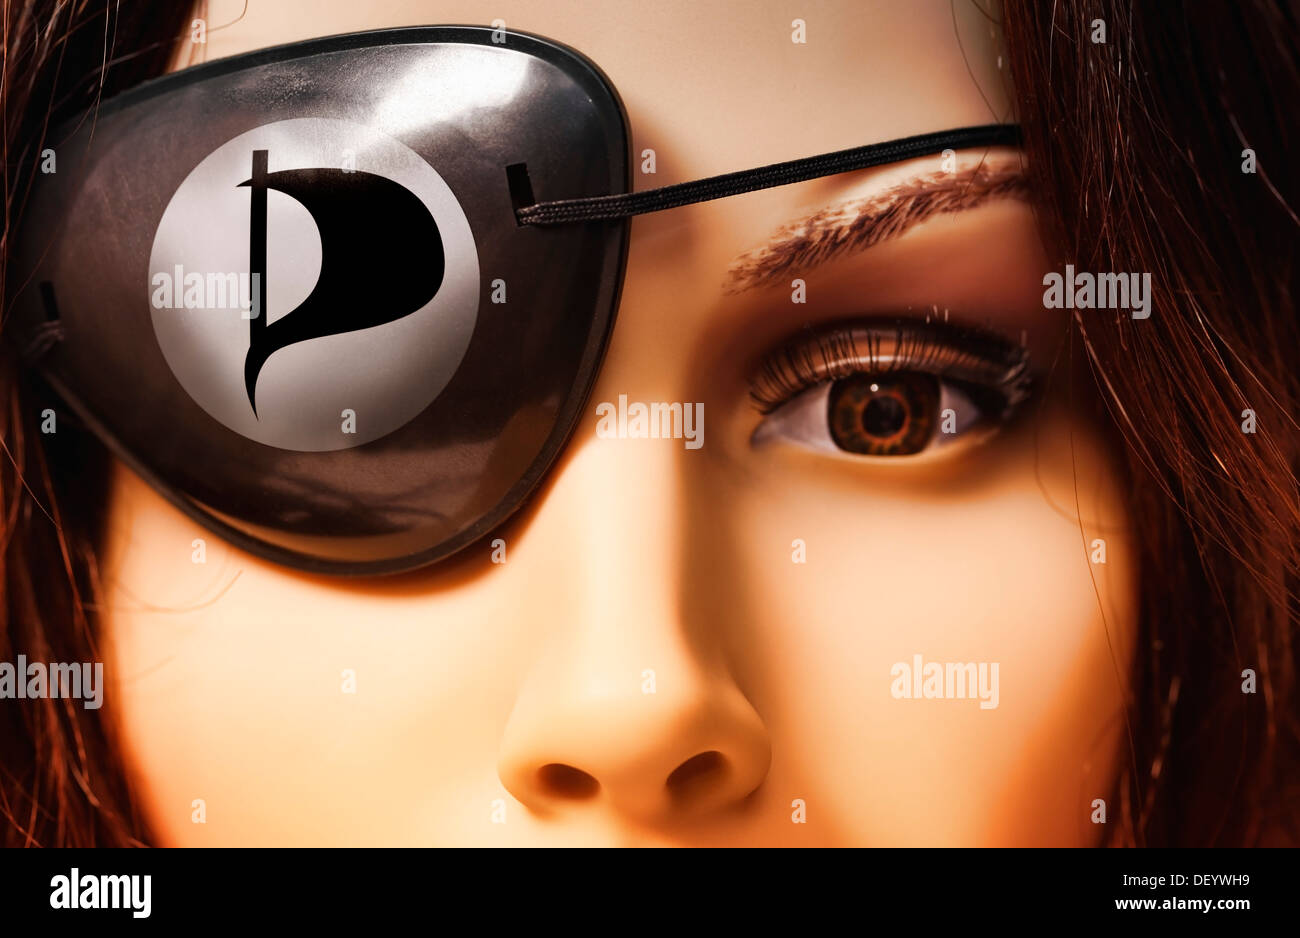 Shop-window mannequin wearing an eye patch, symbolic image for the Pirate Party of Germany Stock Photo